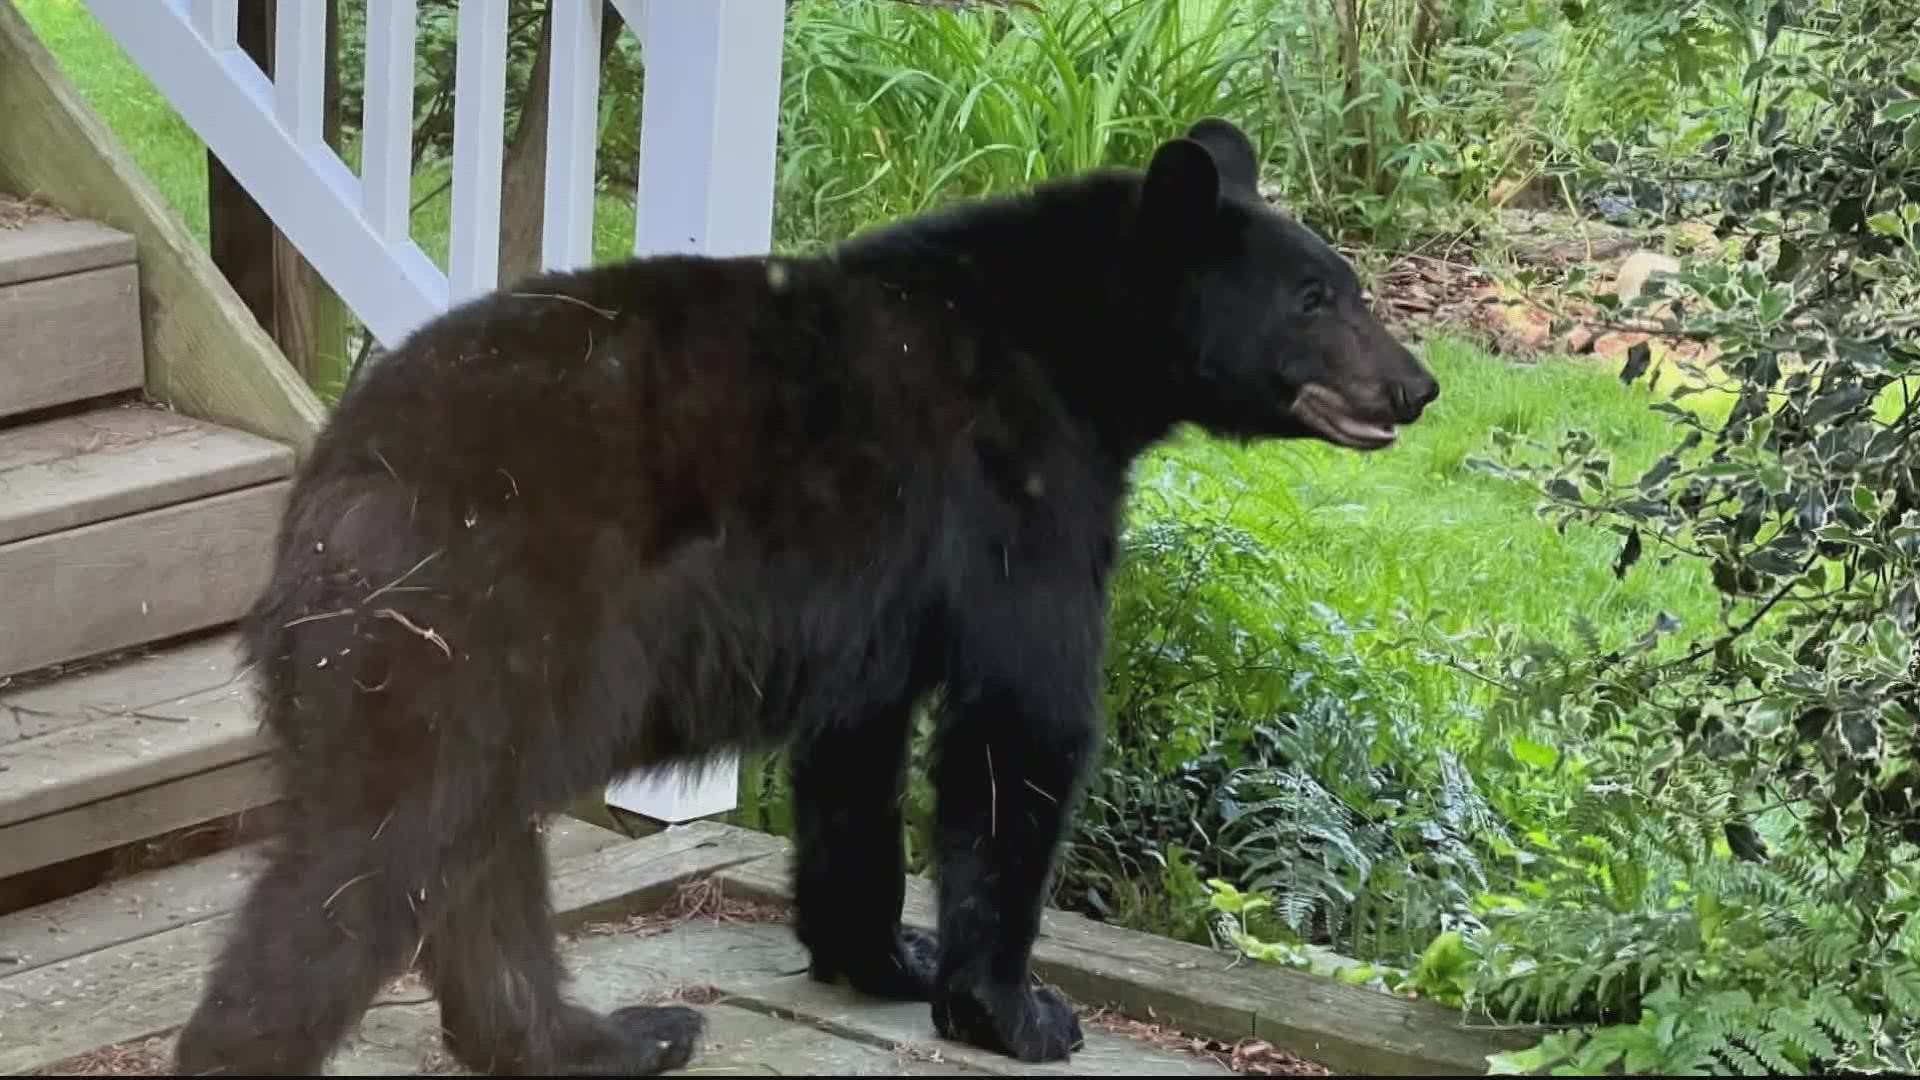 Montgomery County residents say they have seen a bear make its way through their backyard.